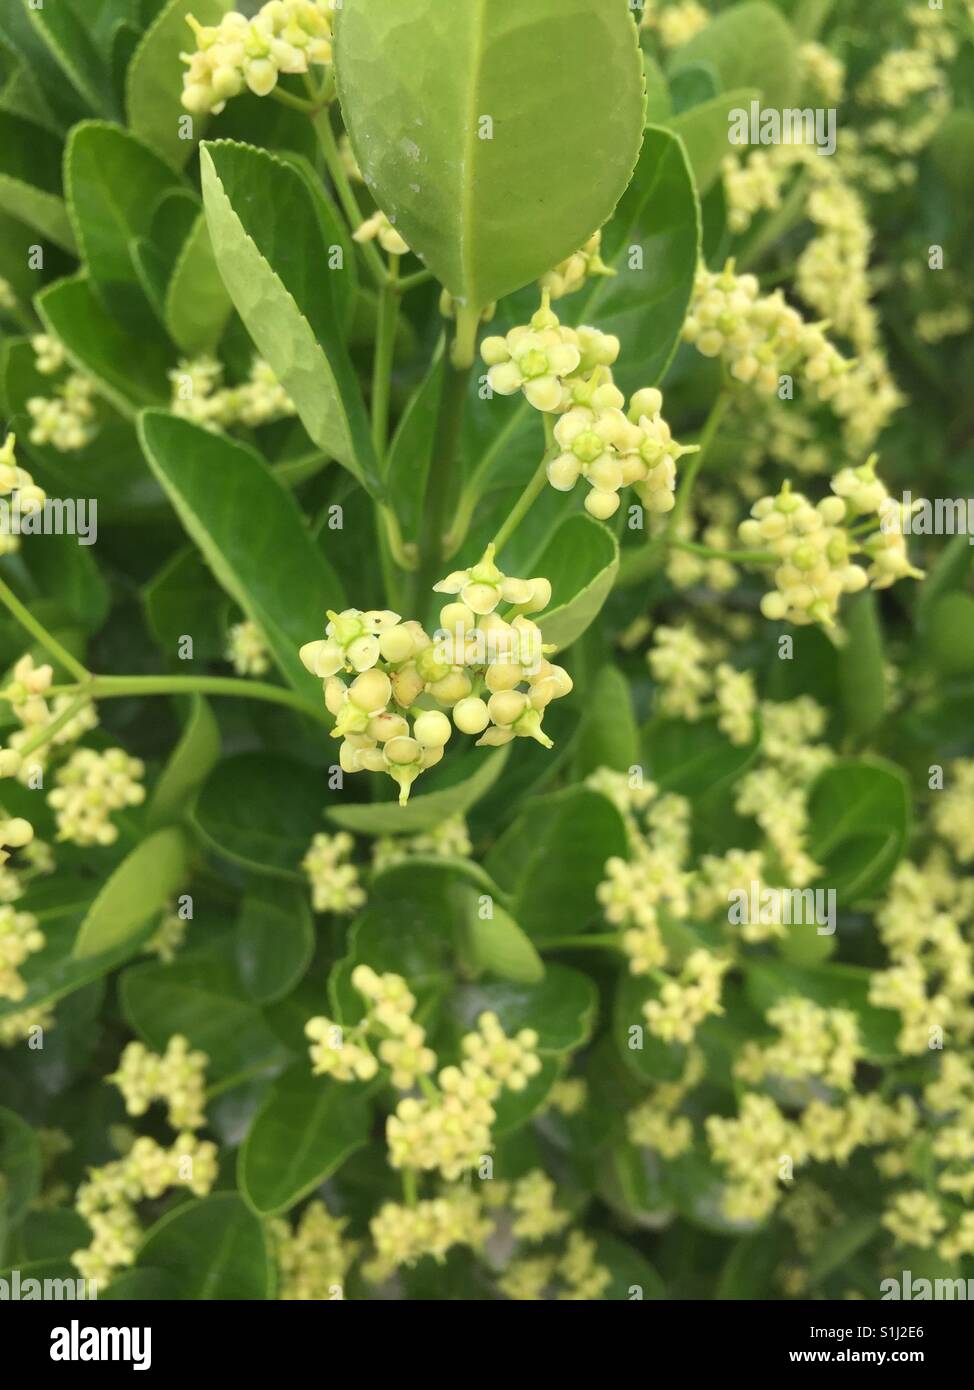 Euonymus japonicus, Spindle Tree Flower Blooming Outsides Stock Photo